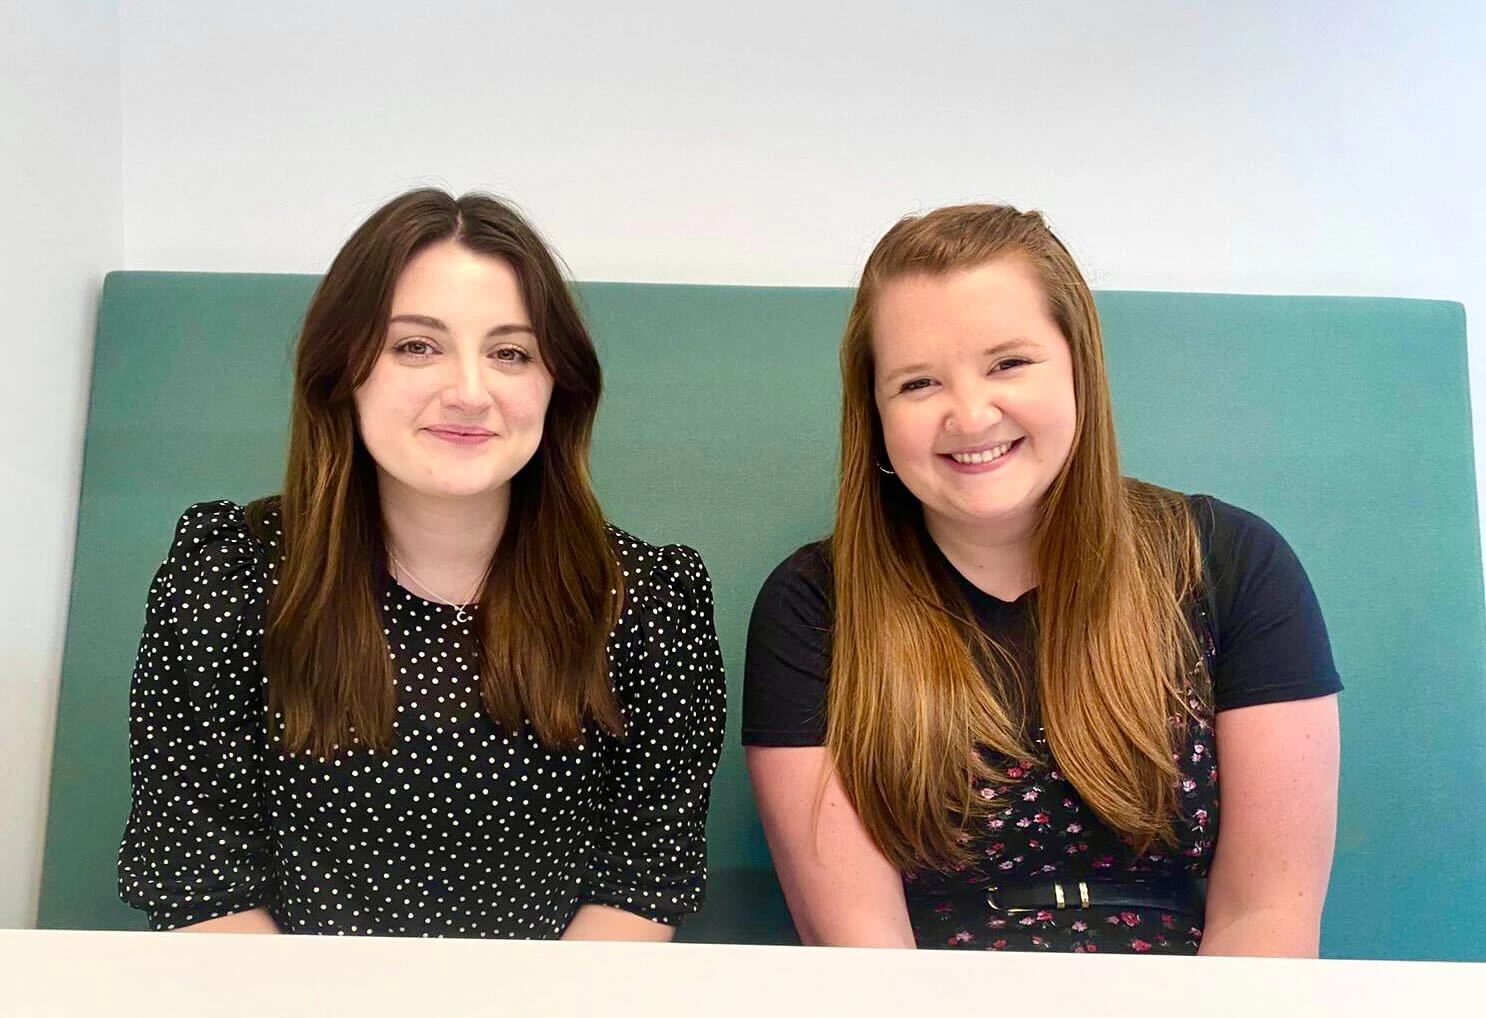 Rebecca White and Laura Booth have joined the Furniture team at Ben Johnson Interiors